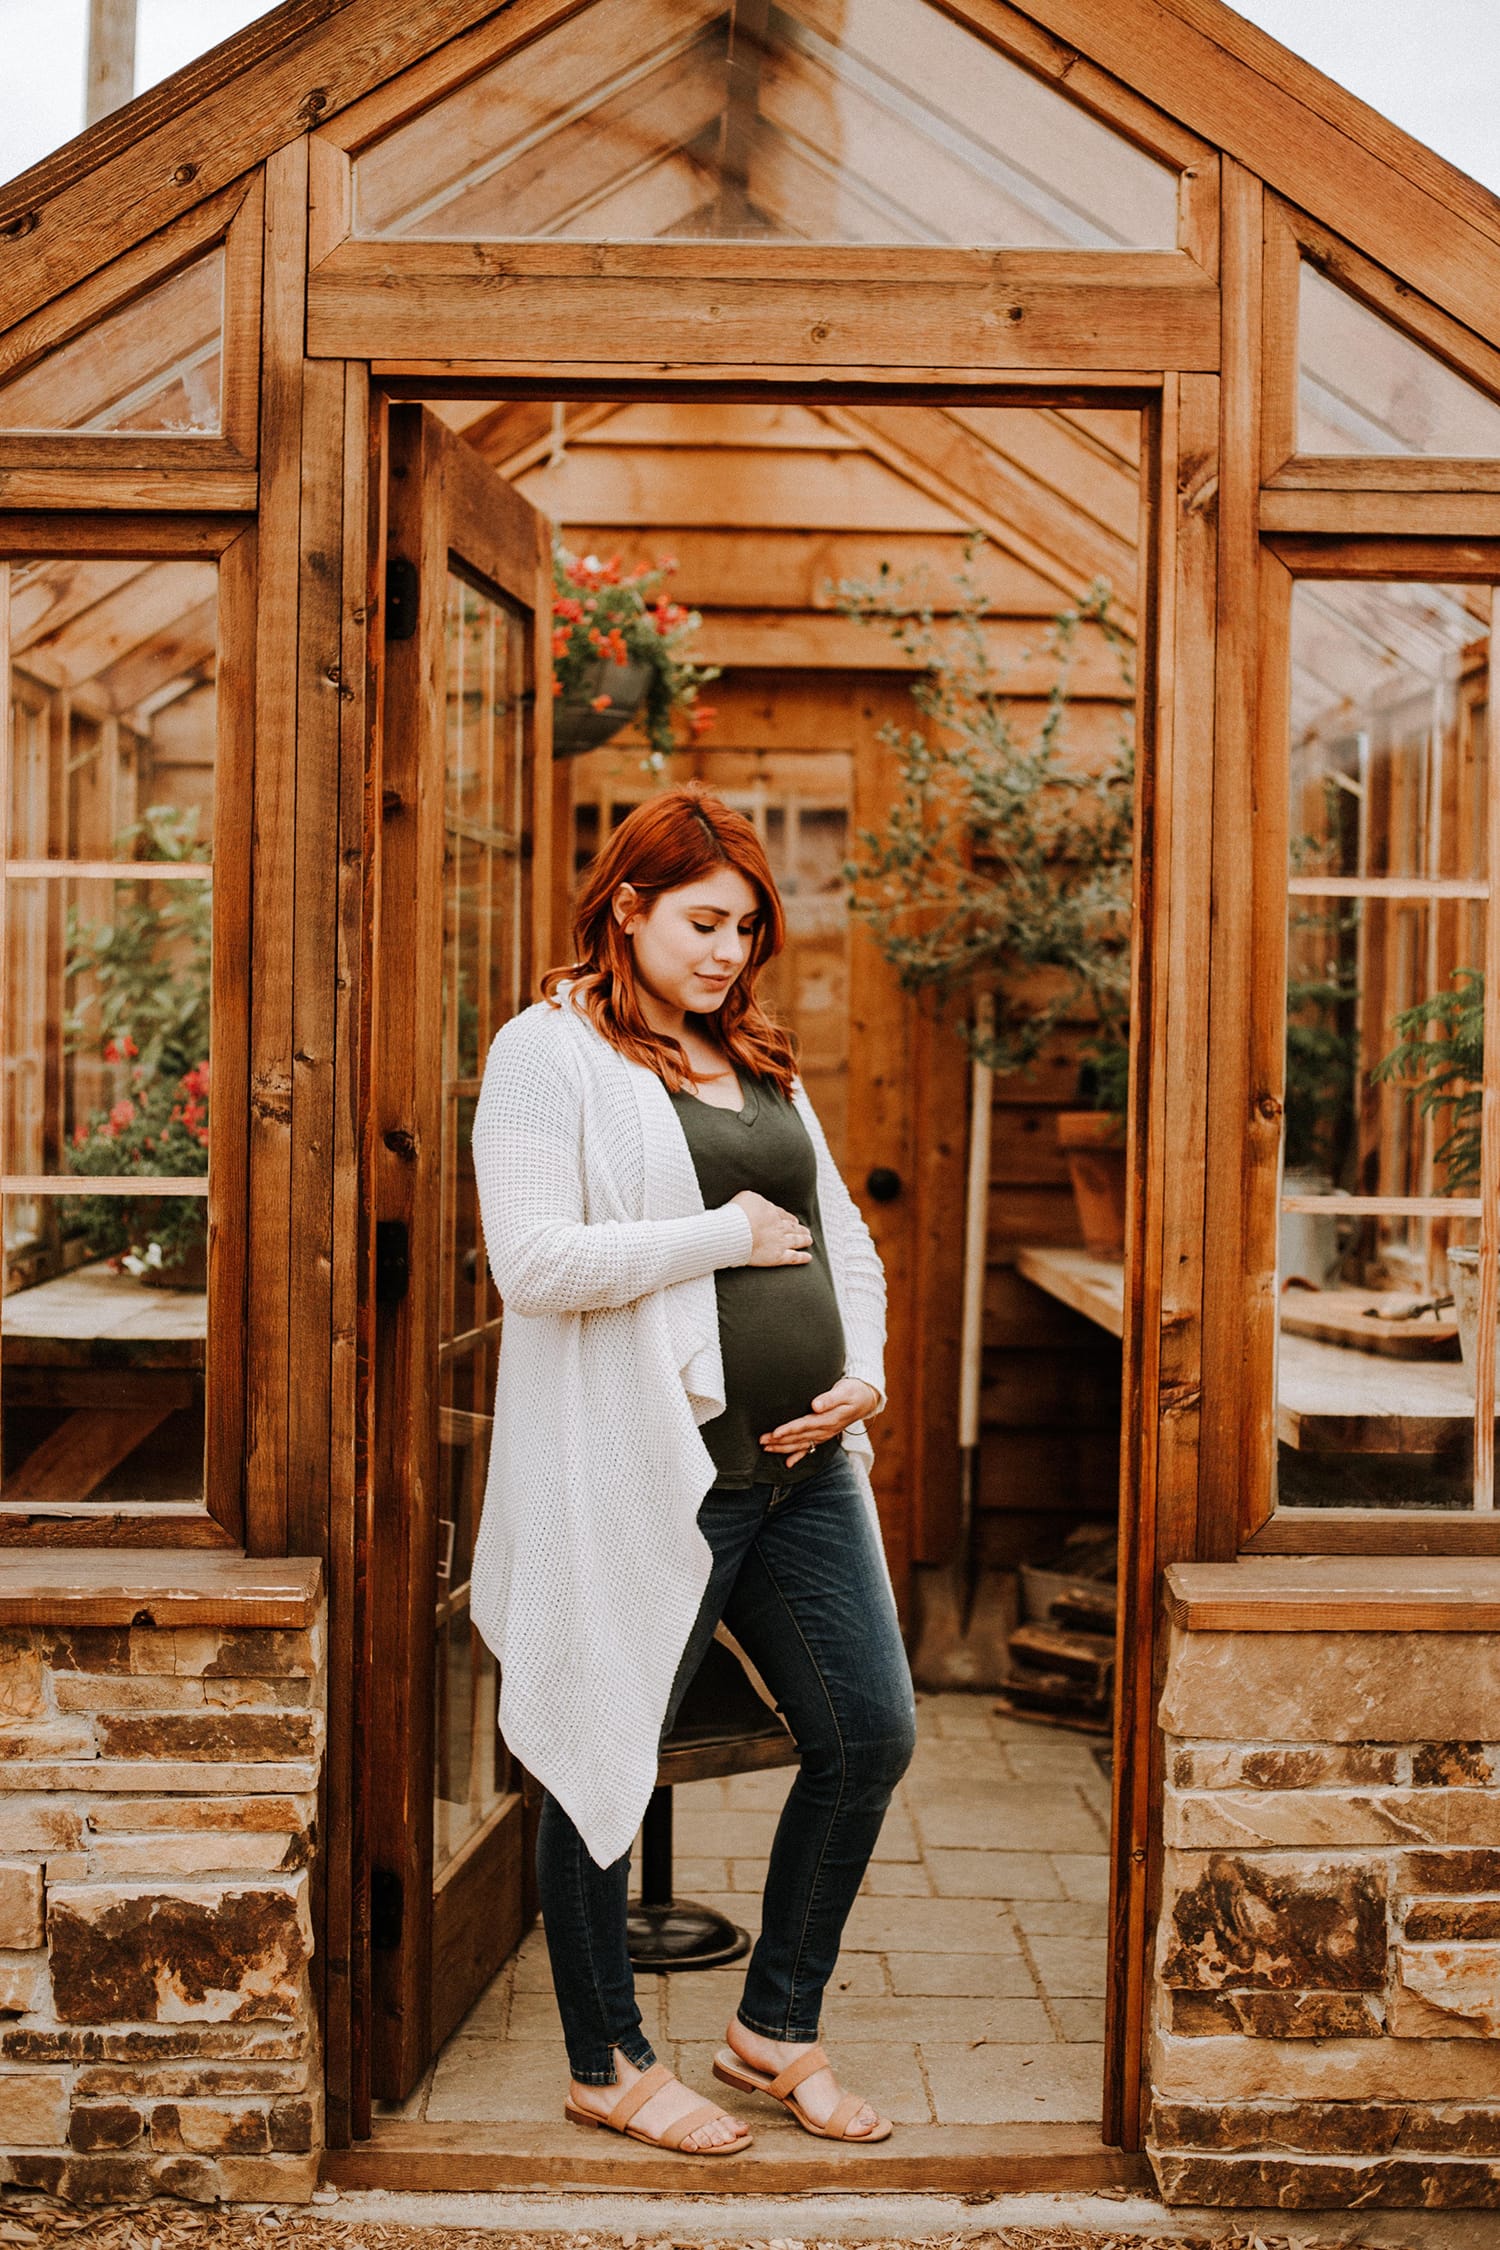 How to Ensure Your Maternity Photography Session Is a Success